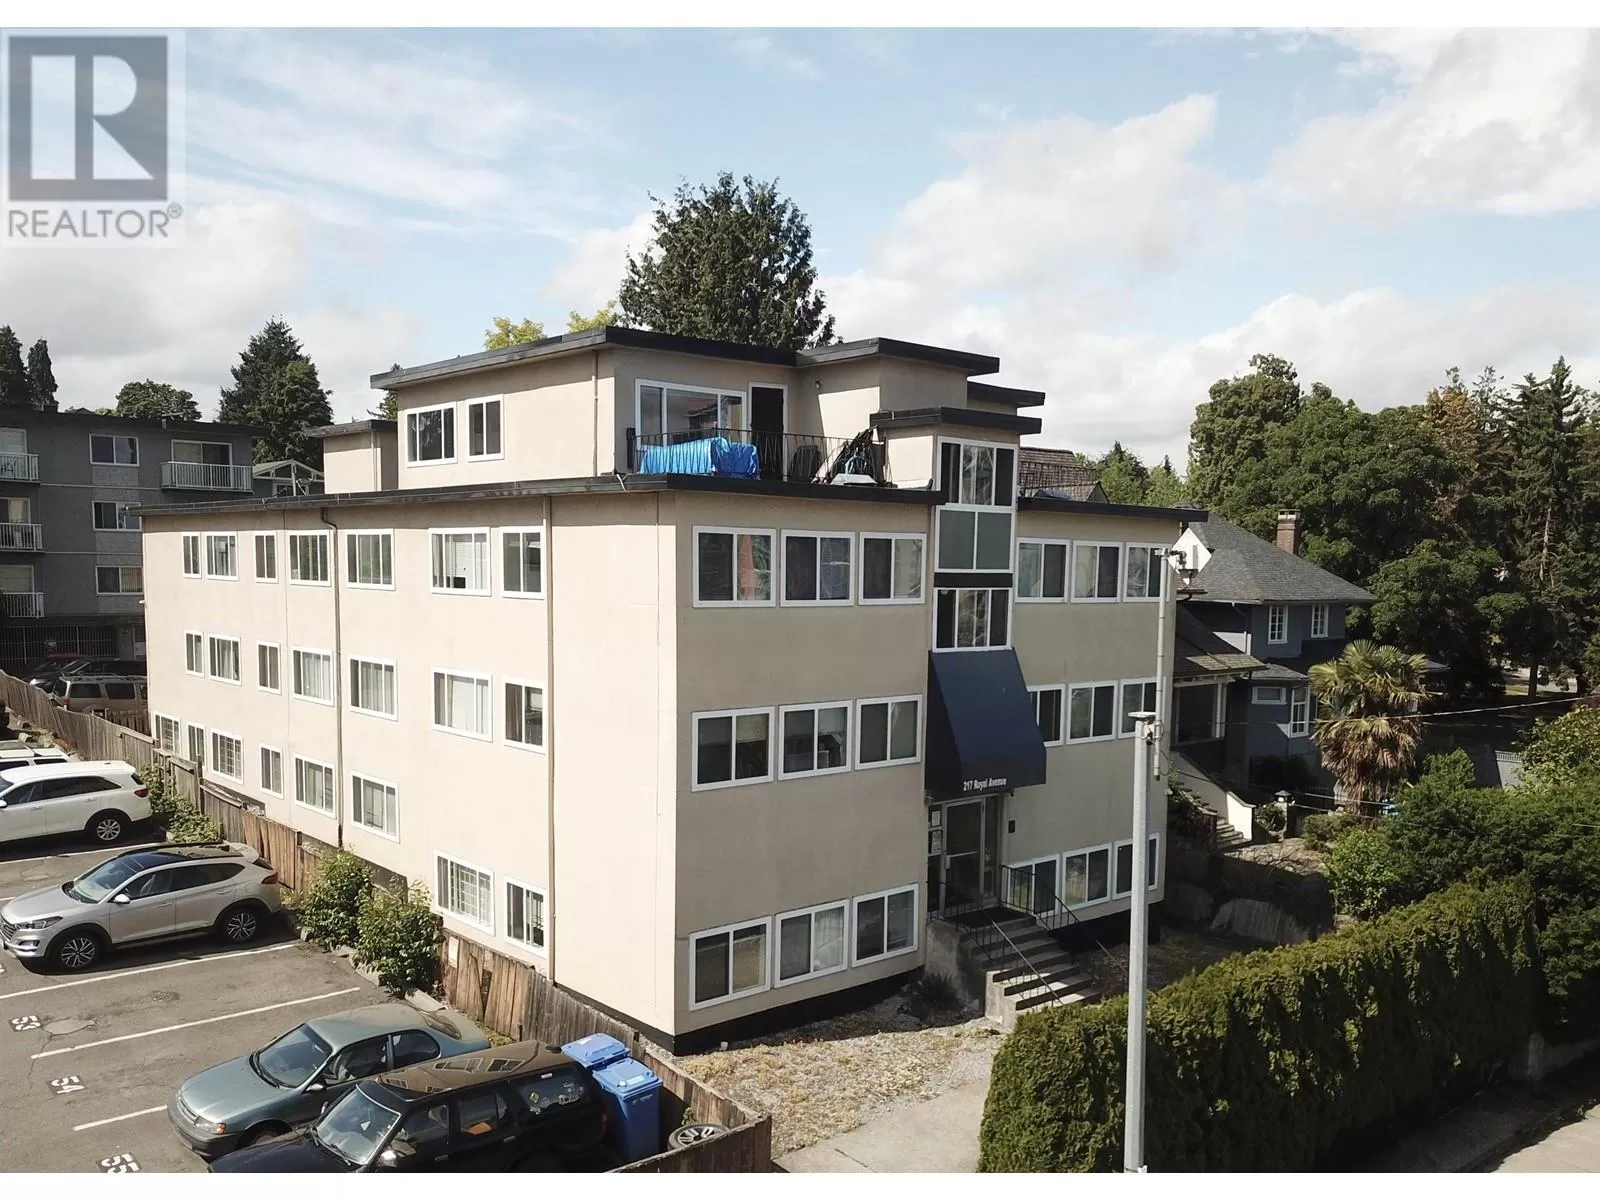 217 Royal Avenue, New Westminster, British Columbia V3L 1H4